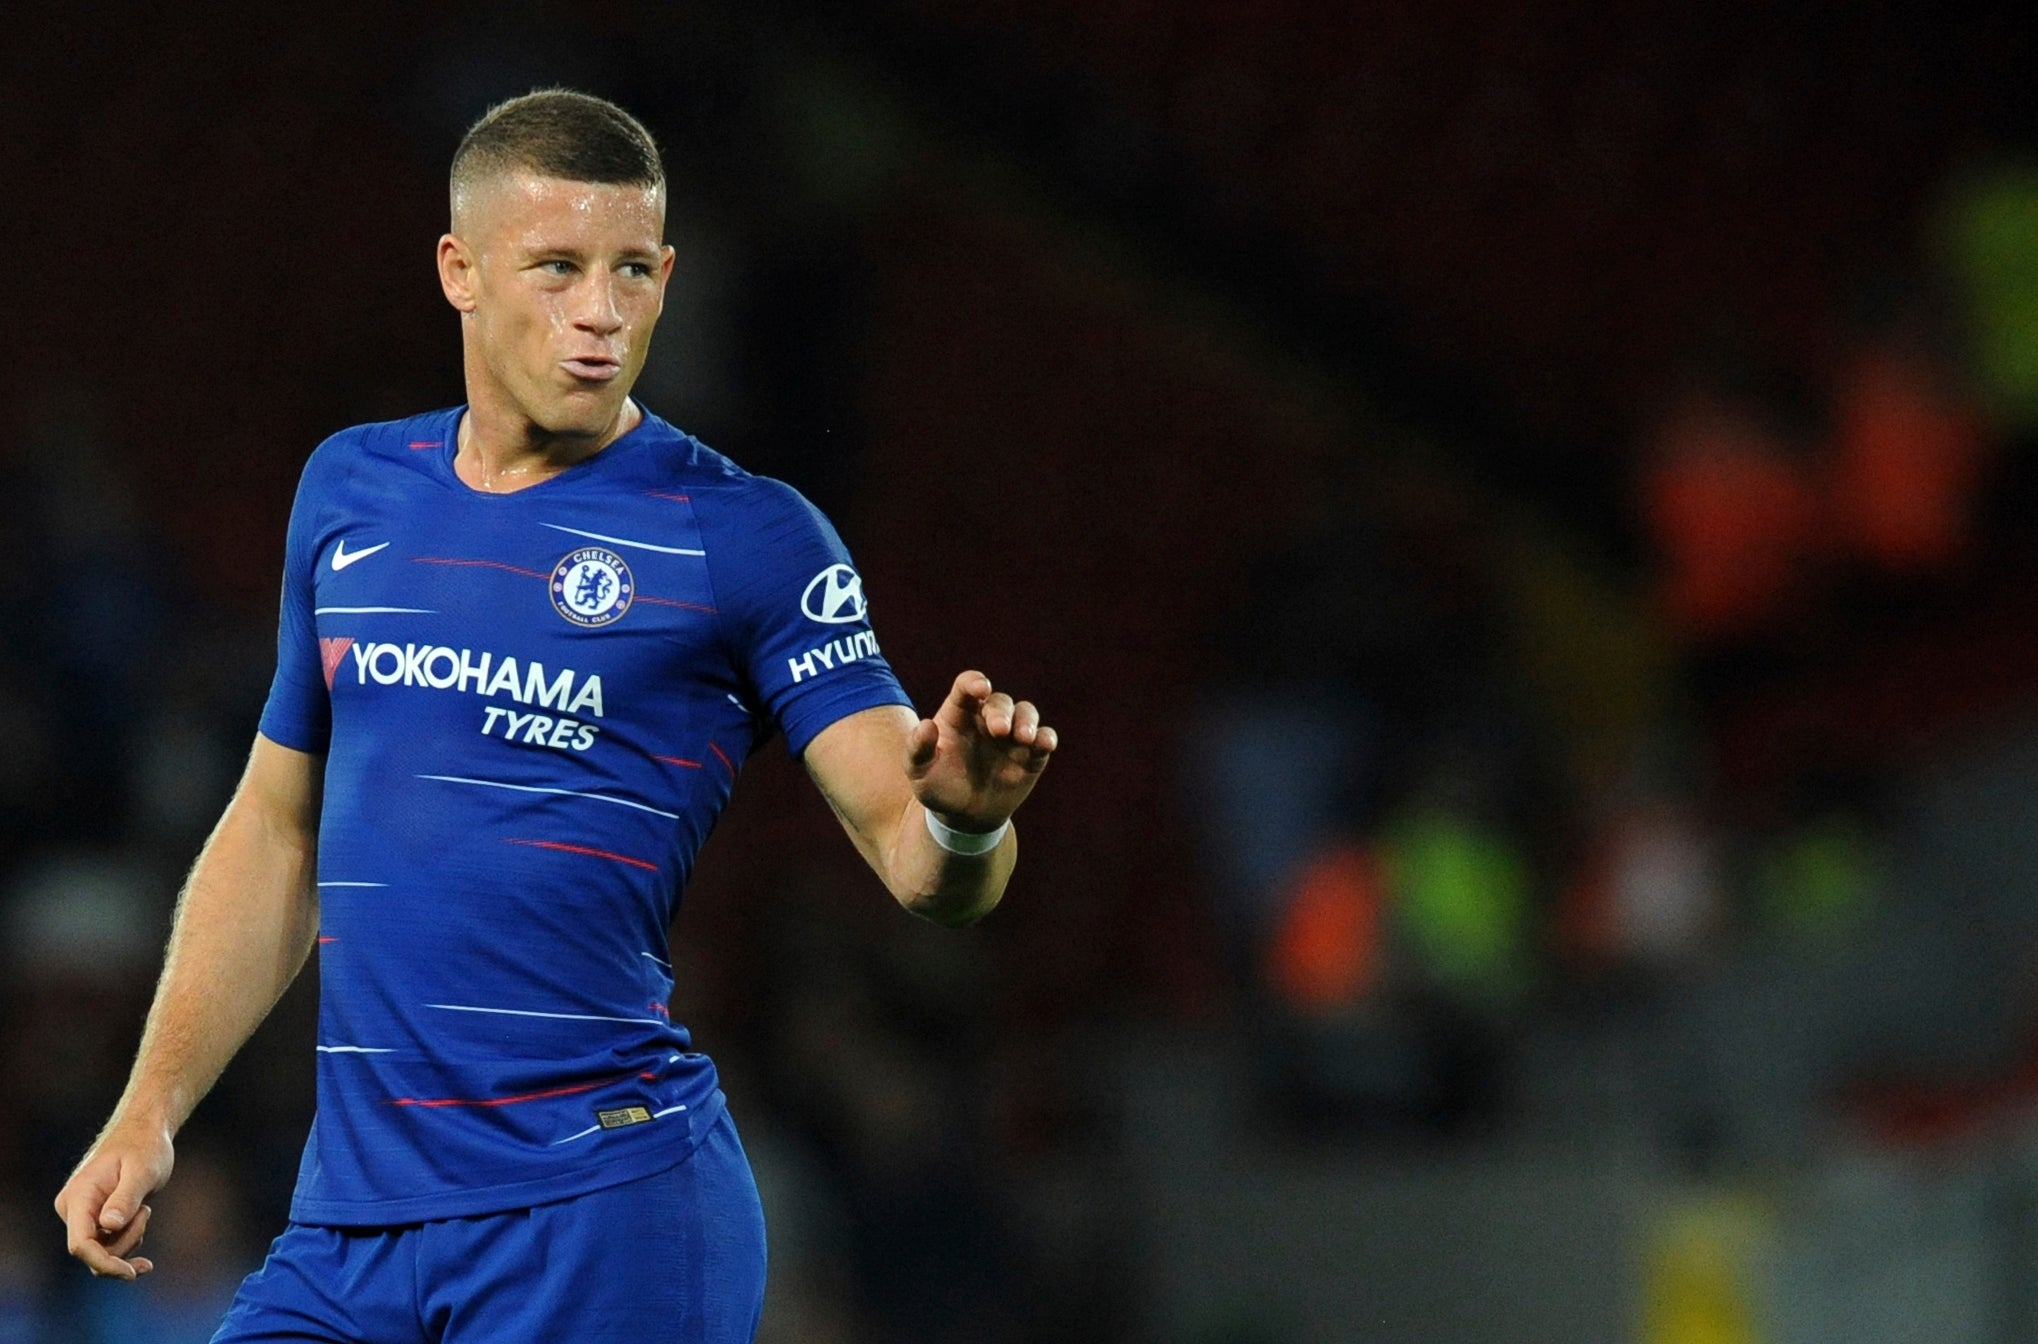 Ross Barkley admits his development stalled at Everton and says he&apos;s finally being coached at Chelsea